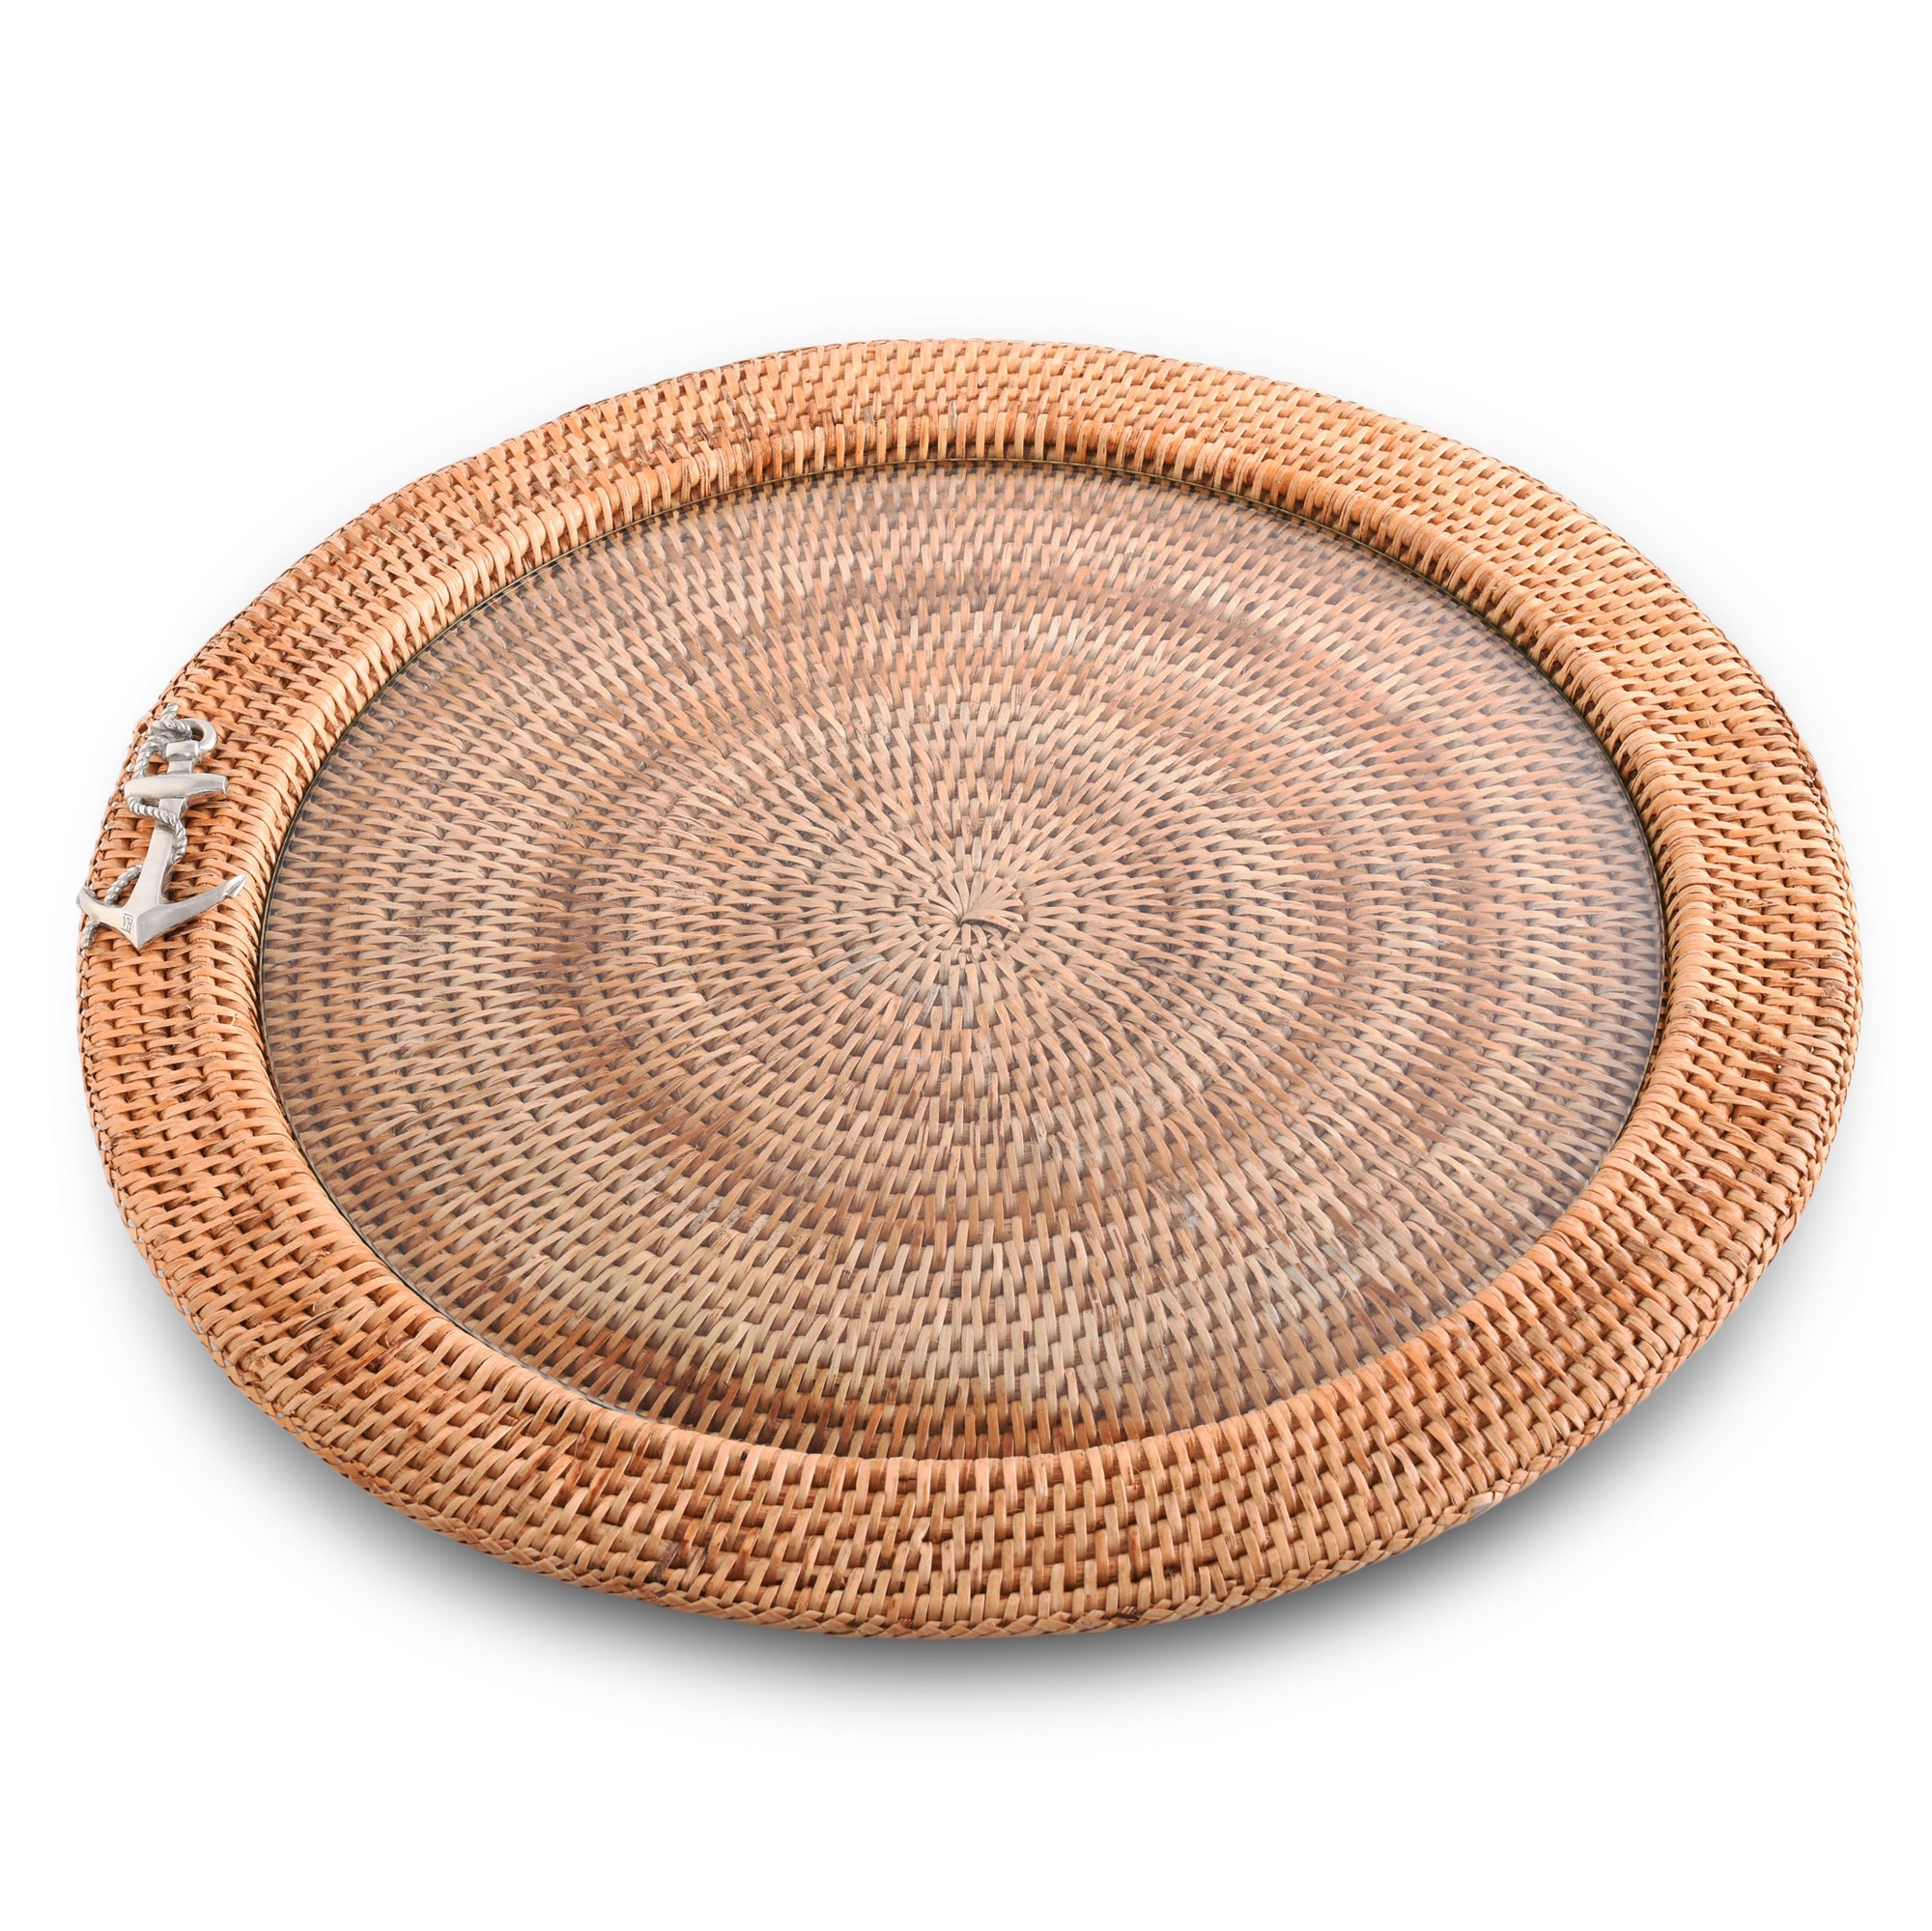 Vagabond House Anchor Round Serving Tray Hand Woven Wicker Rattan - Glass Insert Product Image